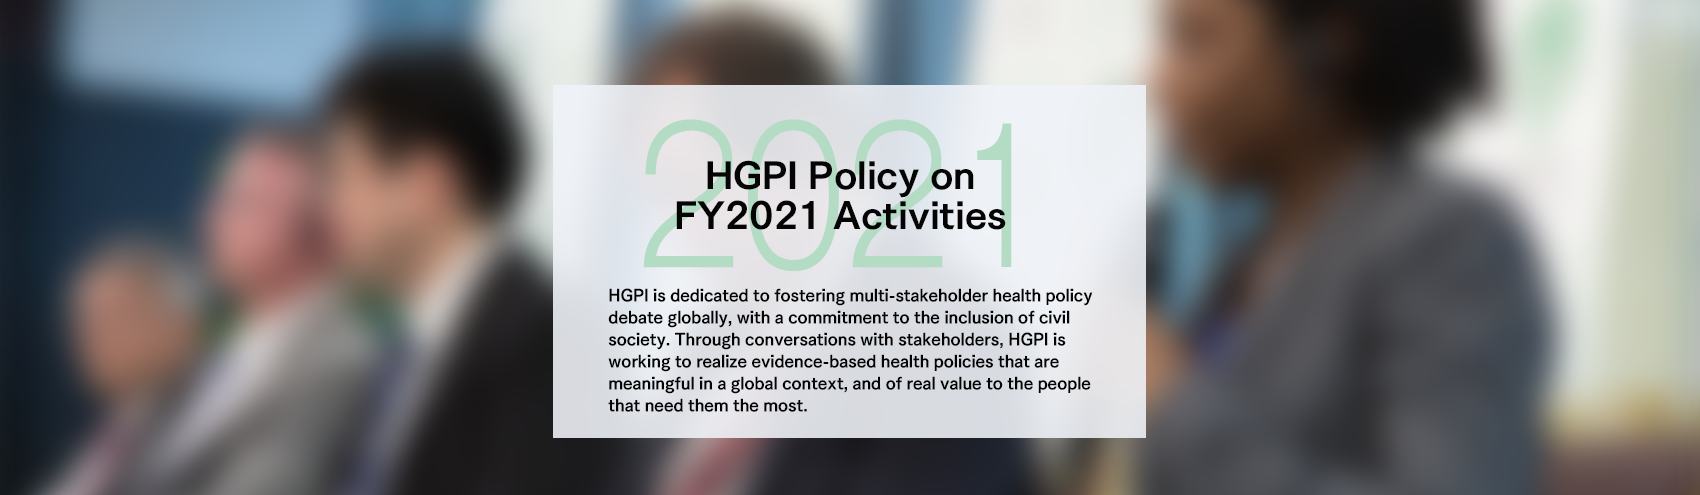 HGPI Policy on FY2021 Activities